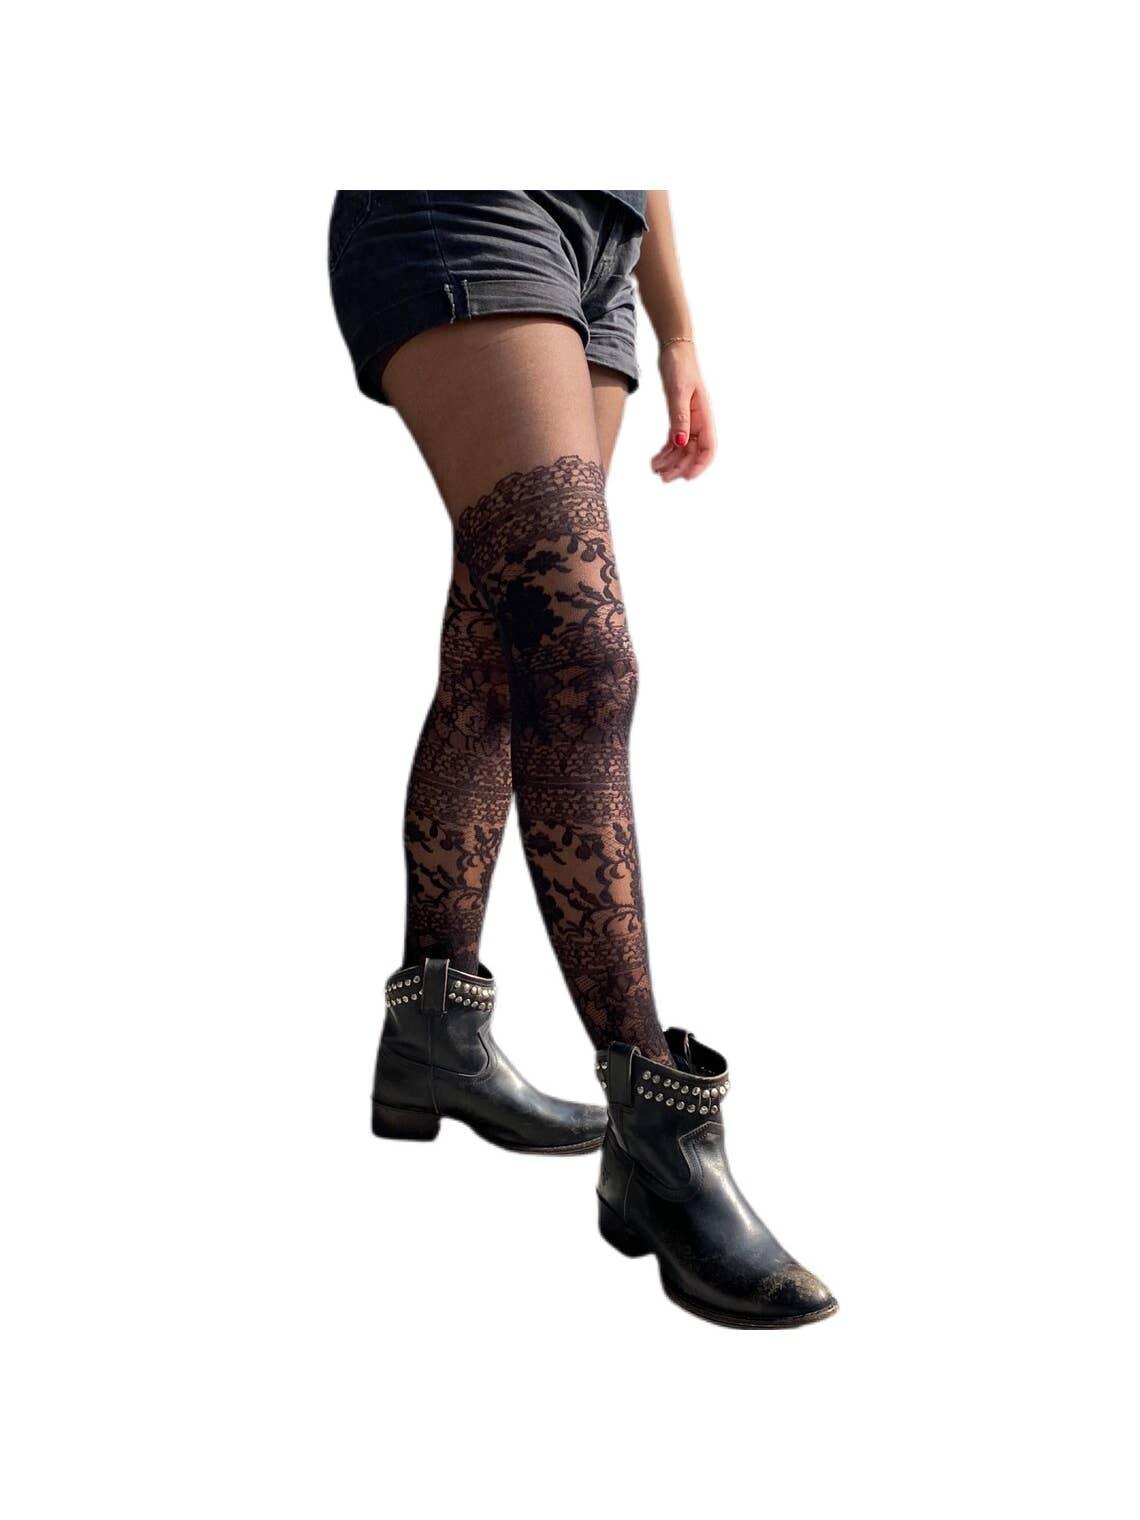 Black Lace sheer Illusion Thigh High Tights - Malka Chic - The Sock Monster